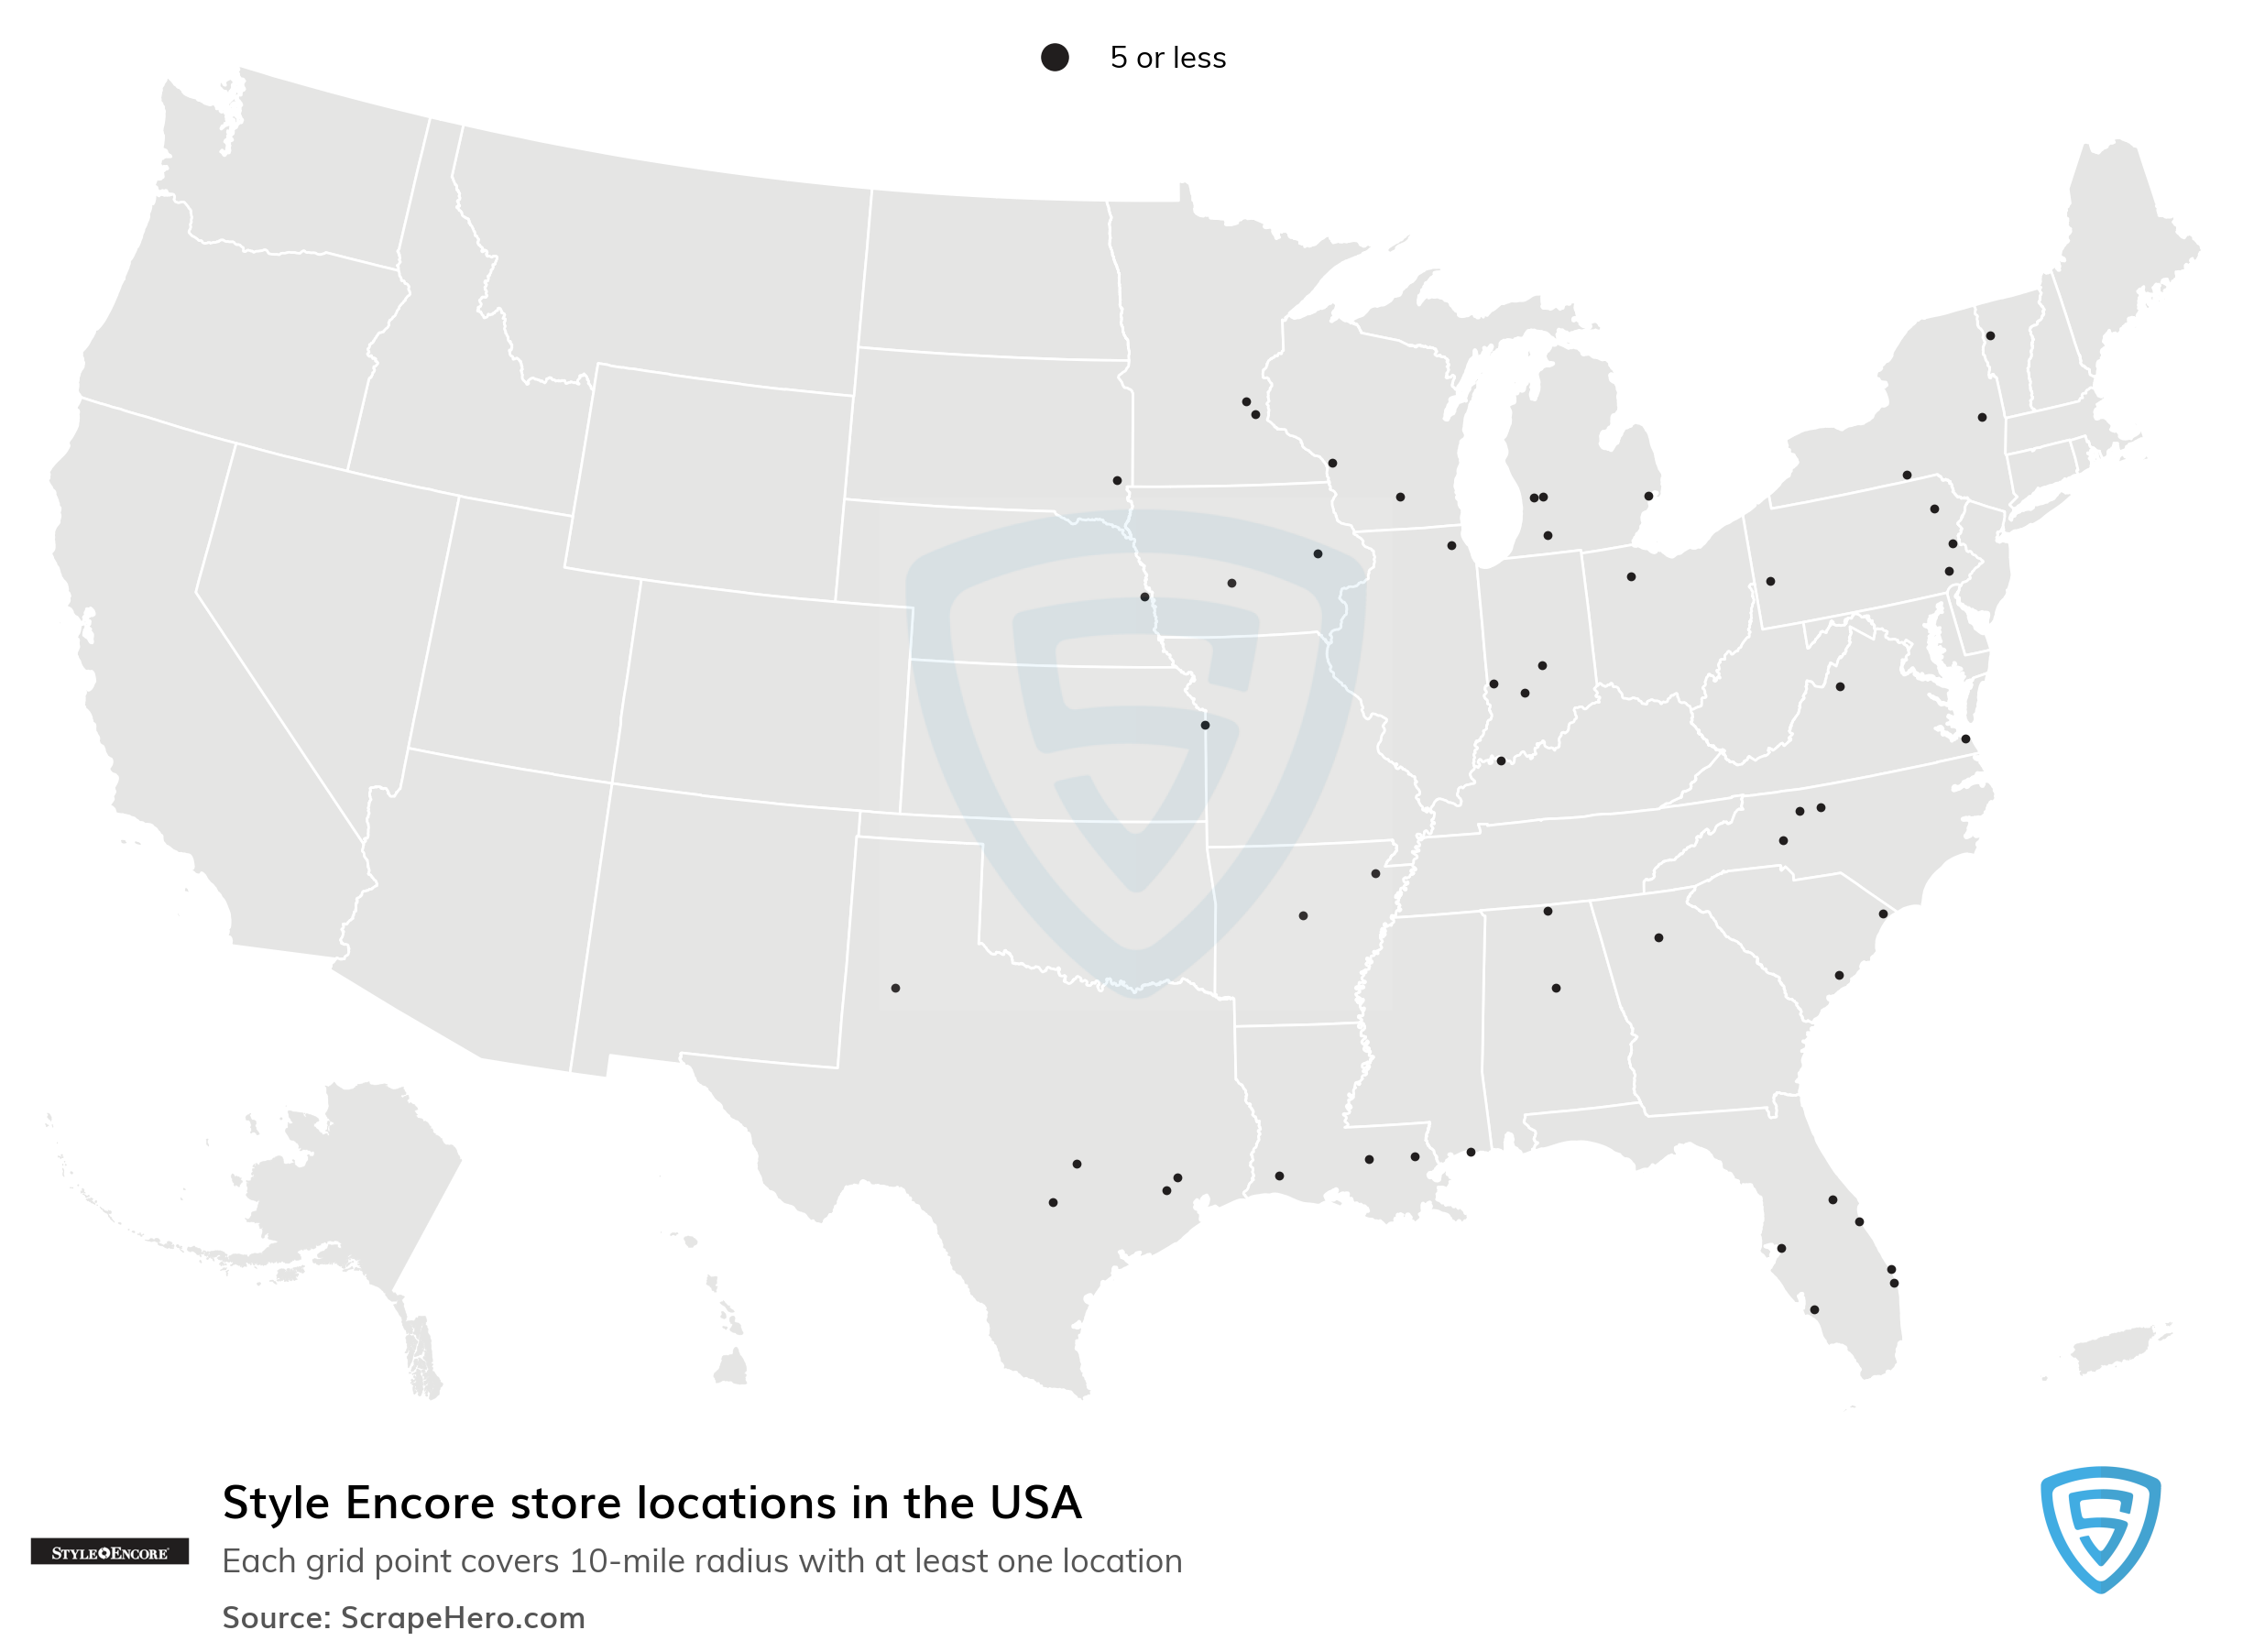 Number of Style Encore locations in the USA in 2023